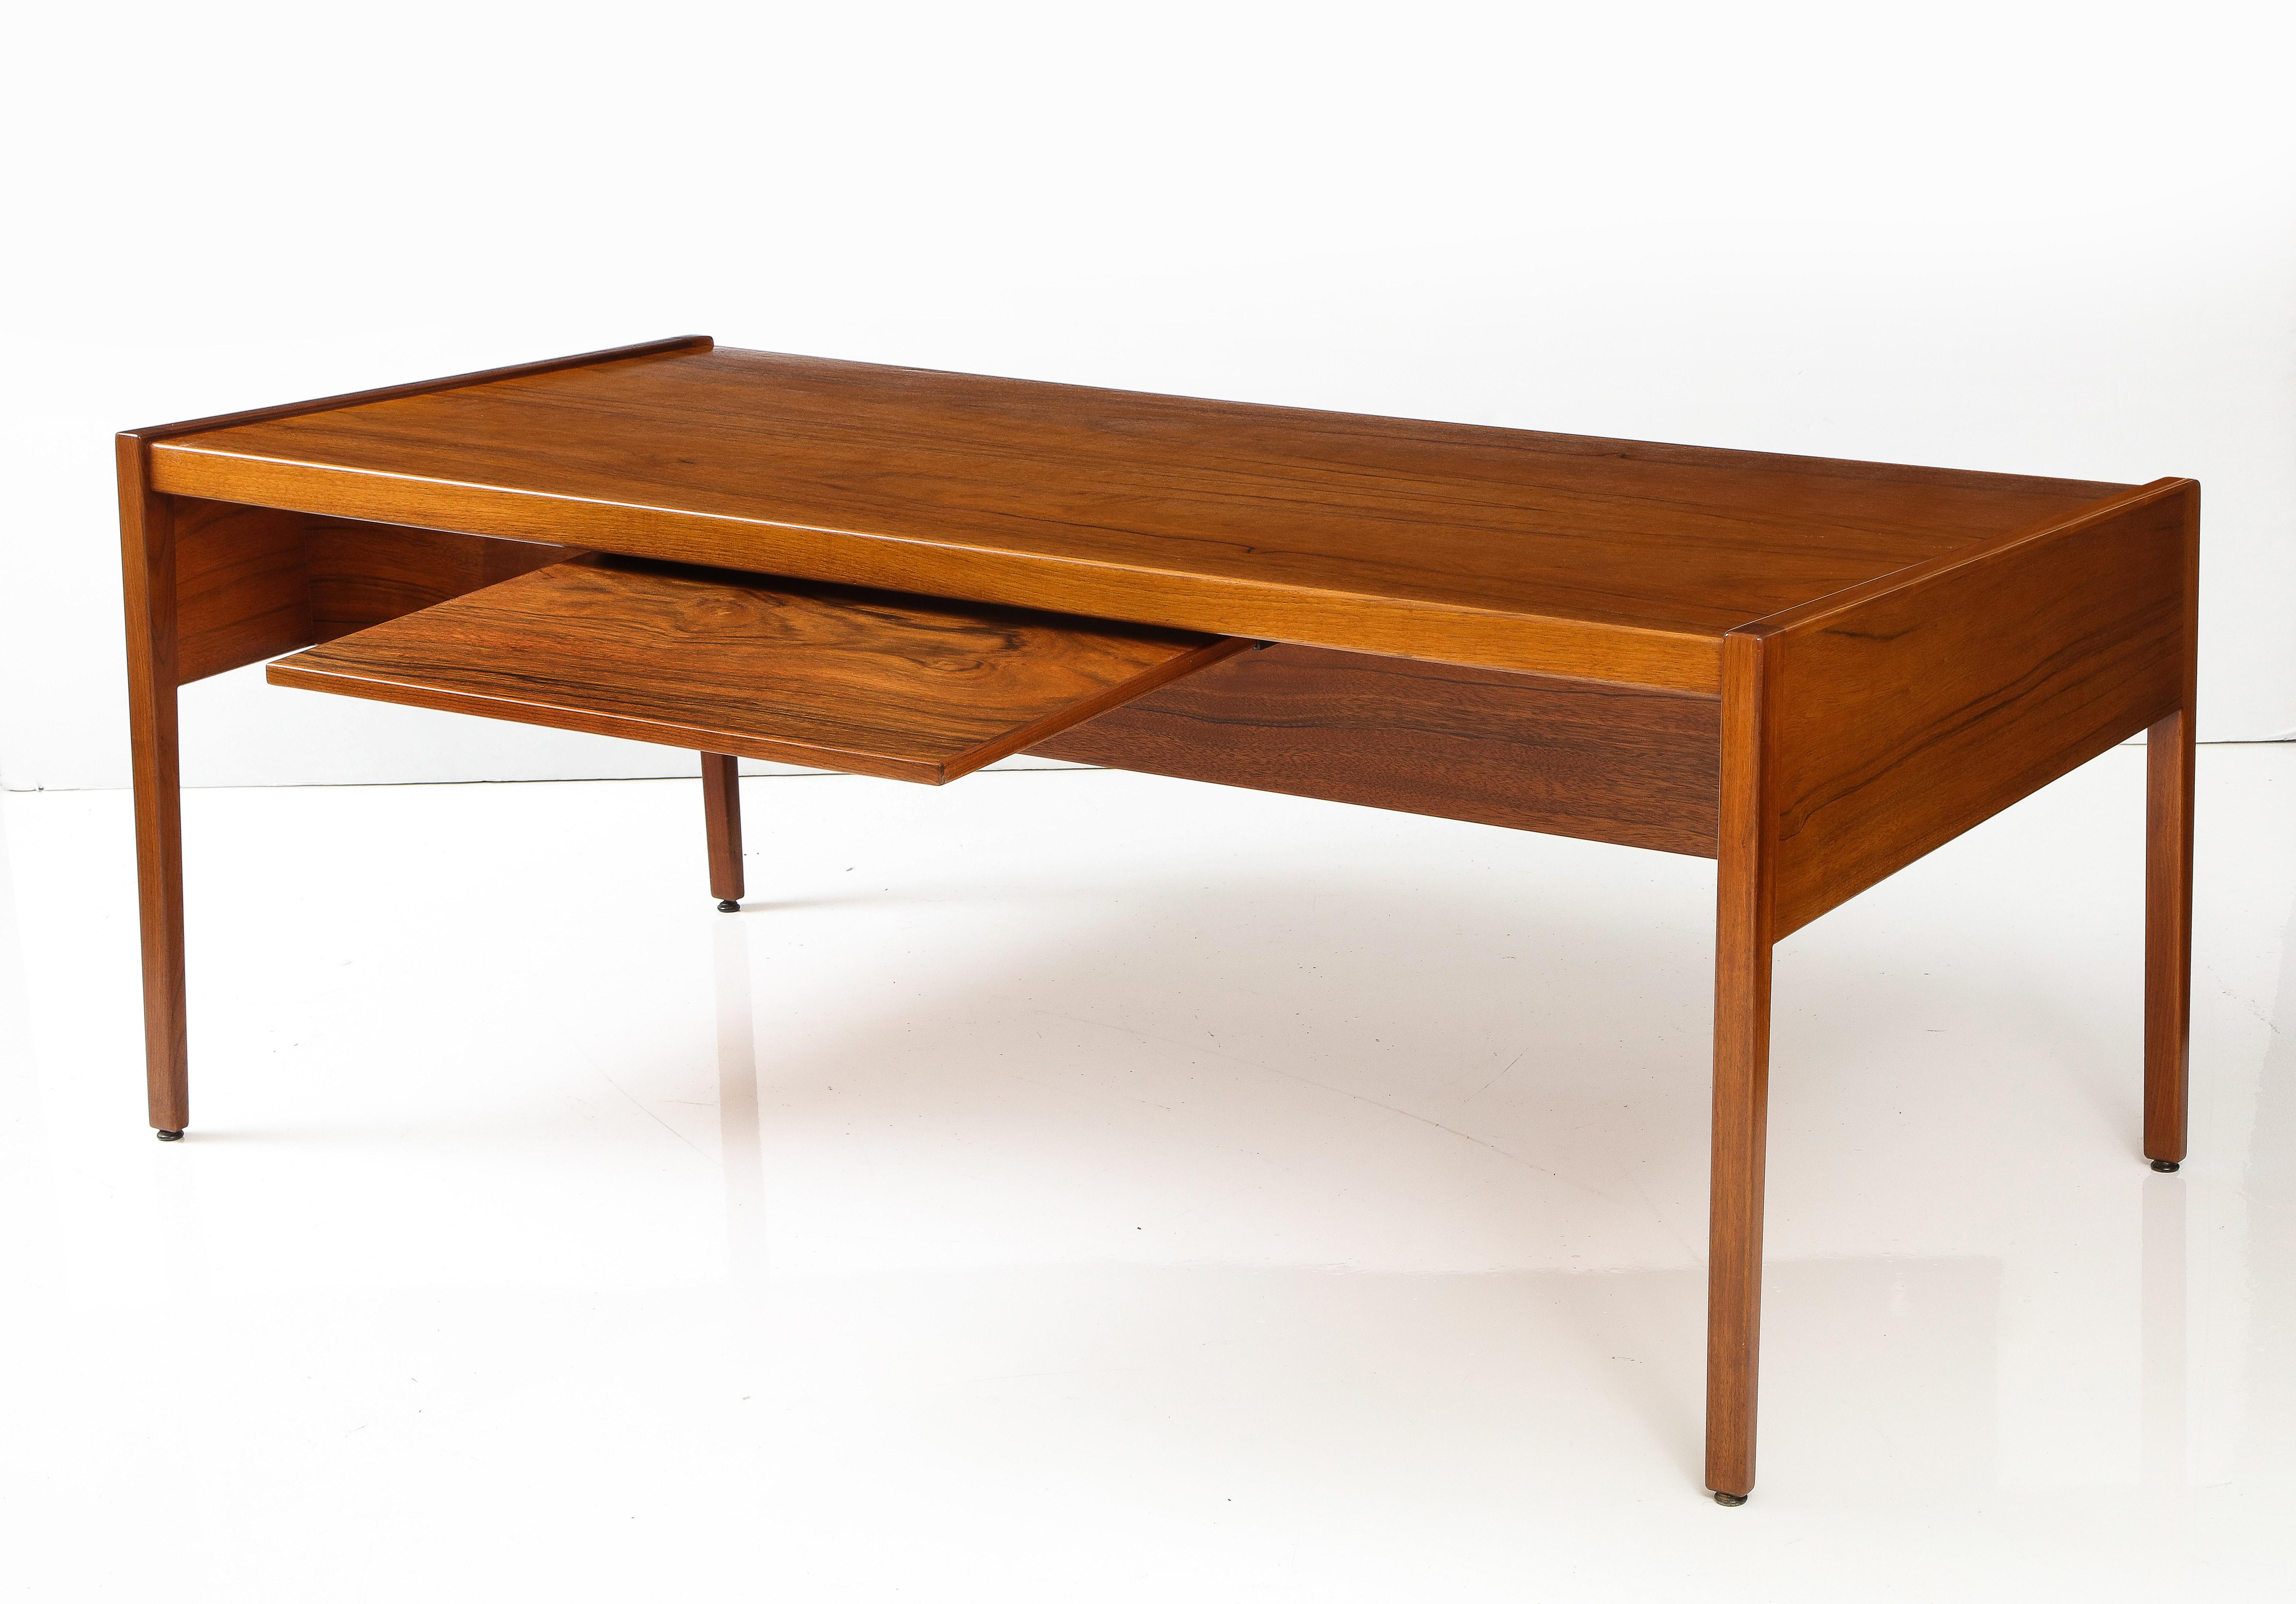 1970's mid-century modern Paldao wood executive desk designed by Jens Risom, with two drawers and two pull out trays with aluminum handles and pull out back large tray, fully restored with minor wear and patina due to age and use.